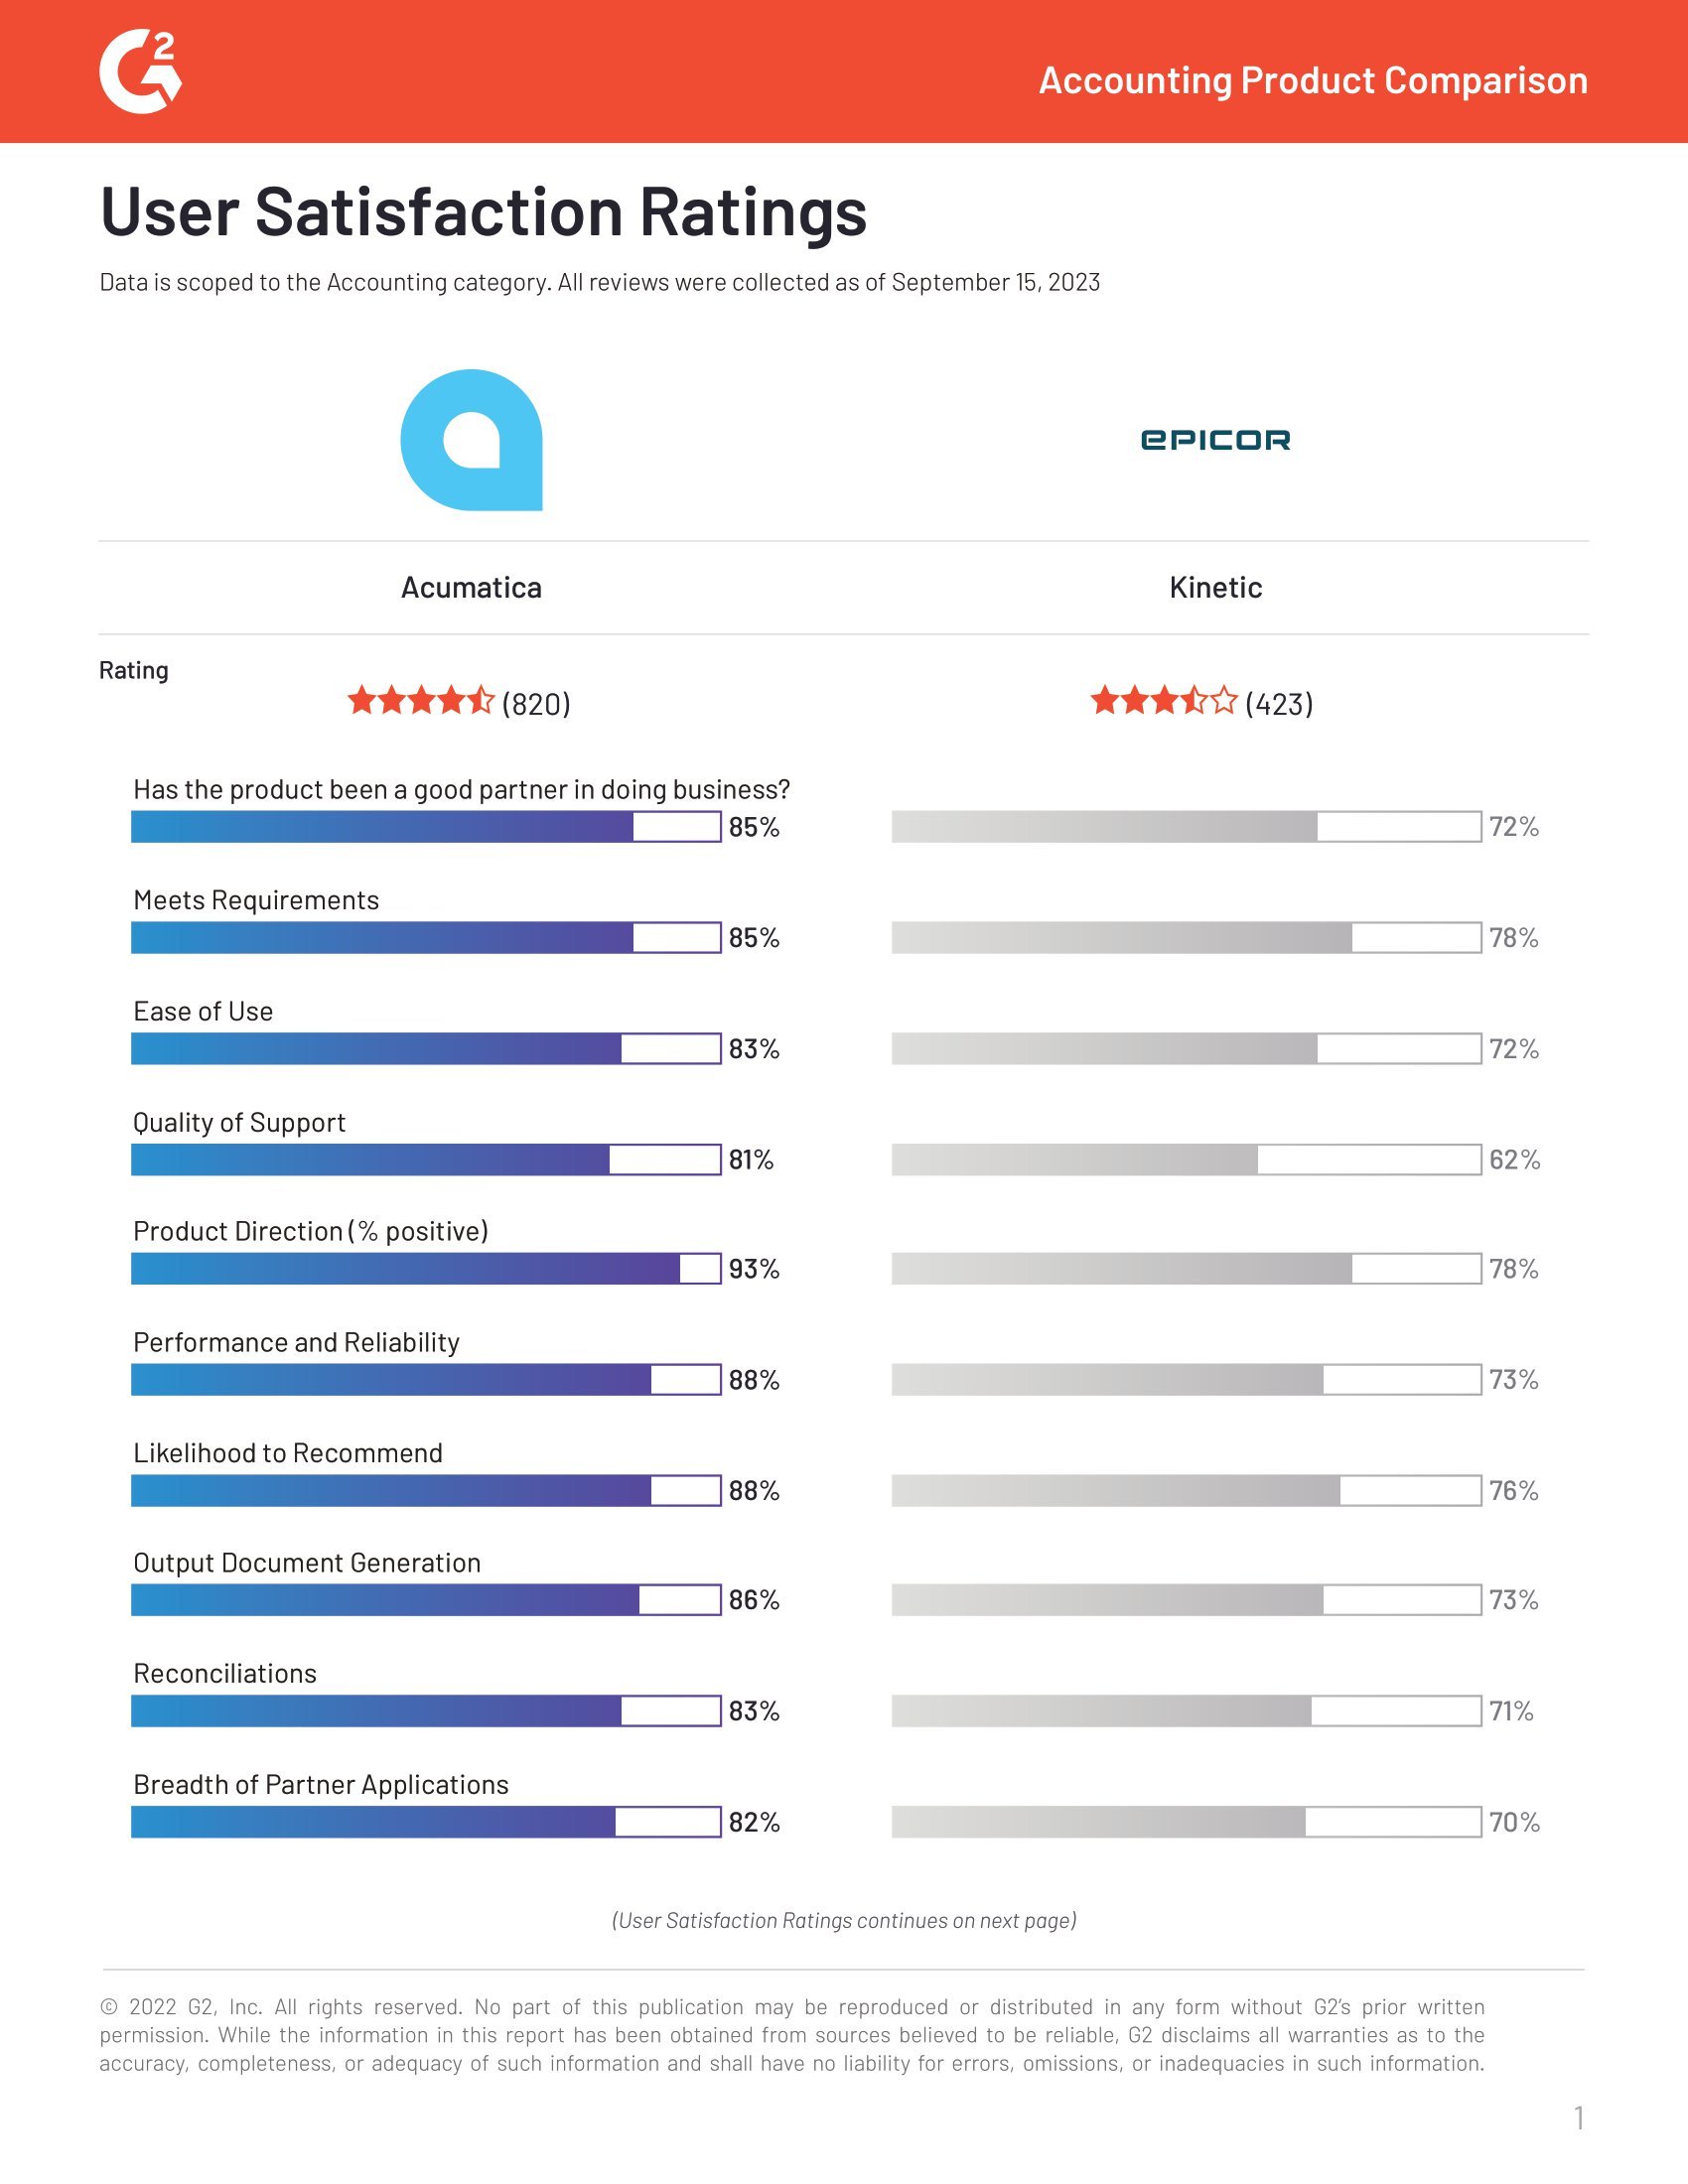 G2 Reviews Acumatica and Epicor Kinetic in the Accounting Category, Users Indicate a Clear Winner